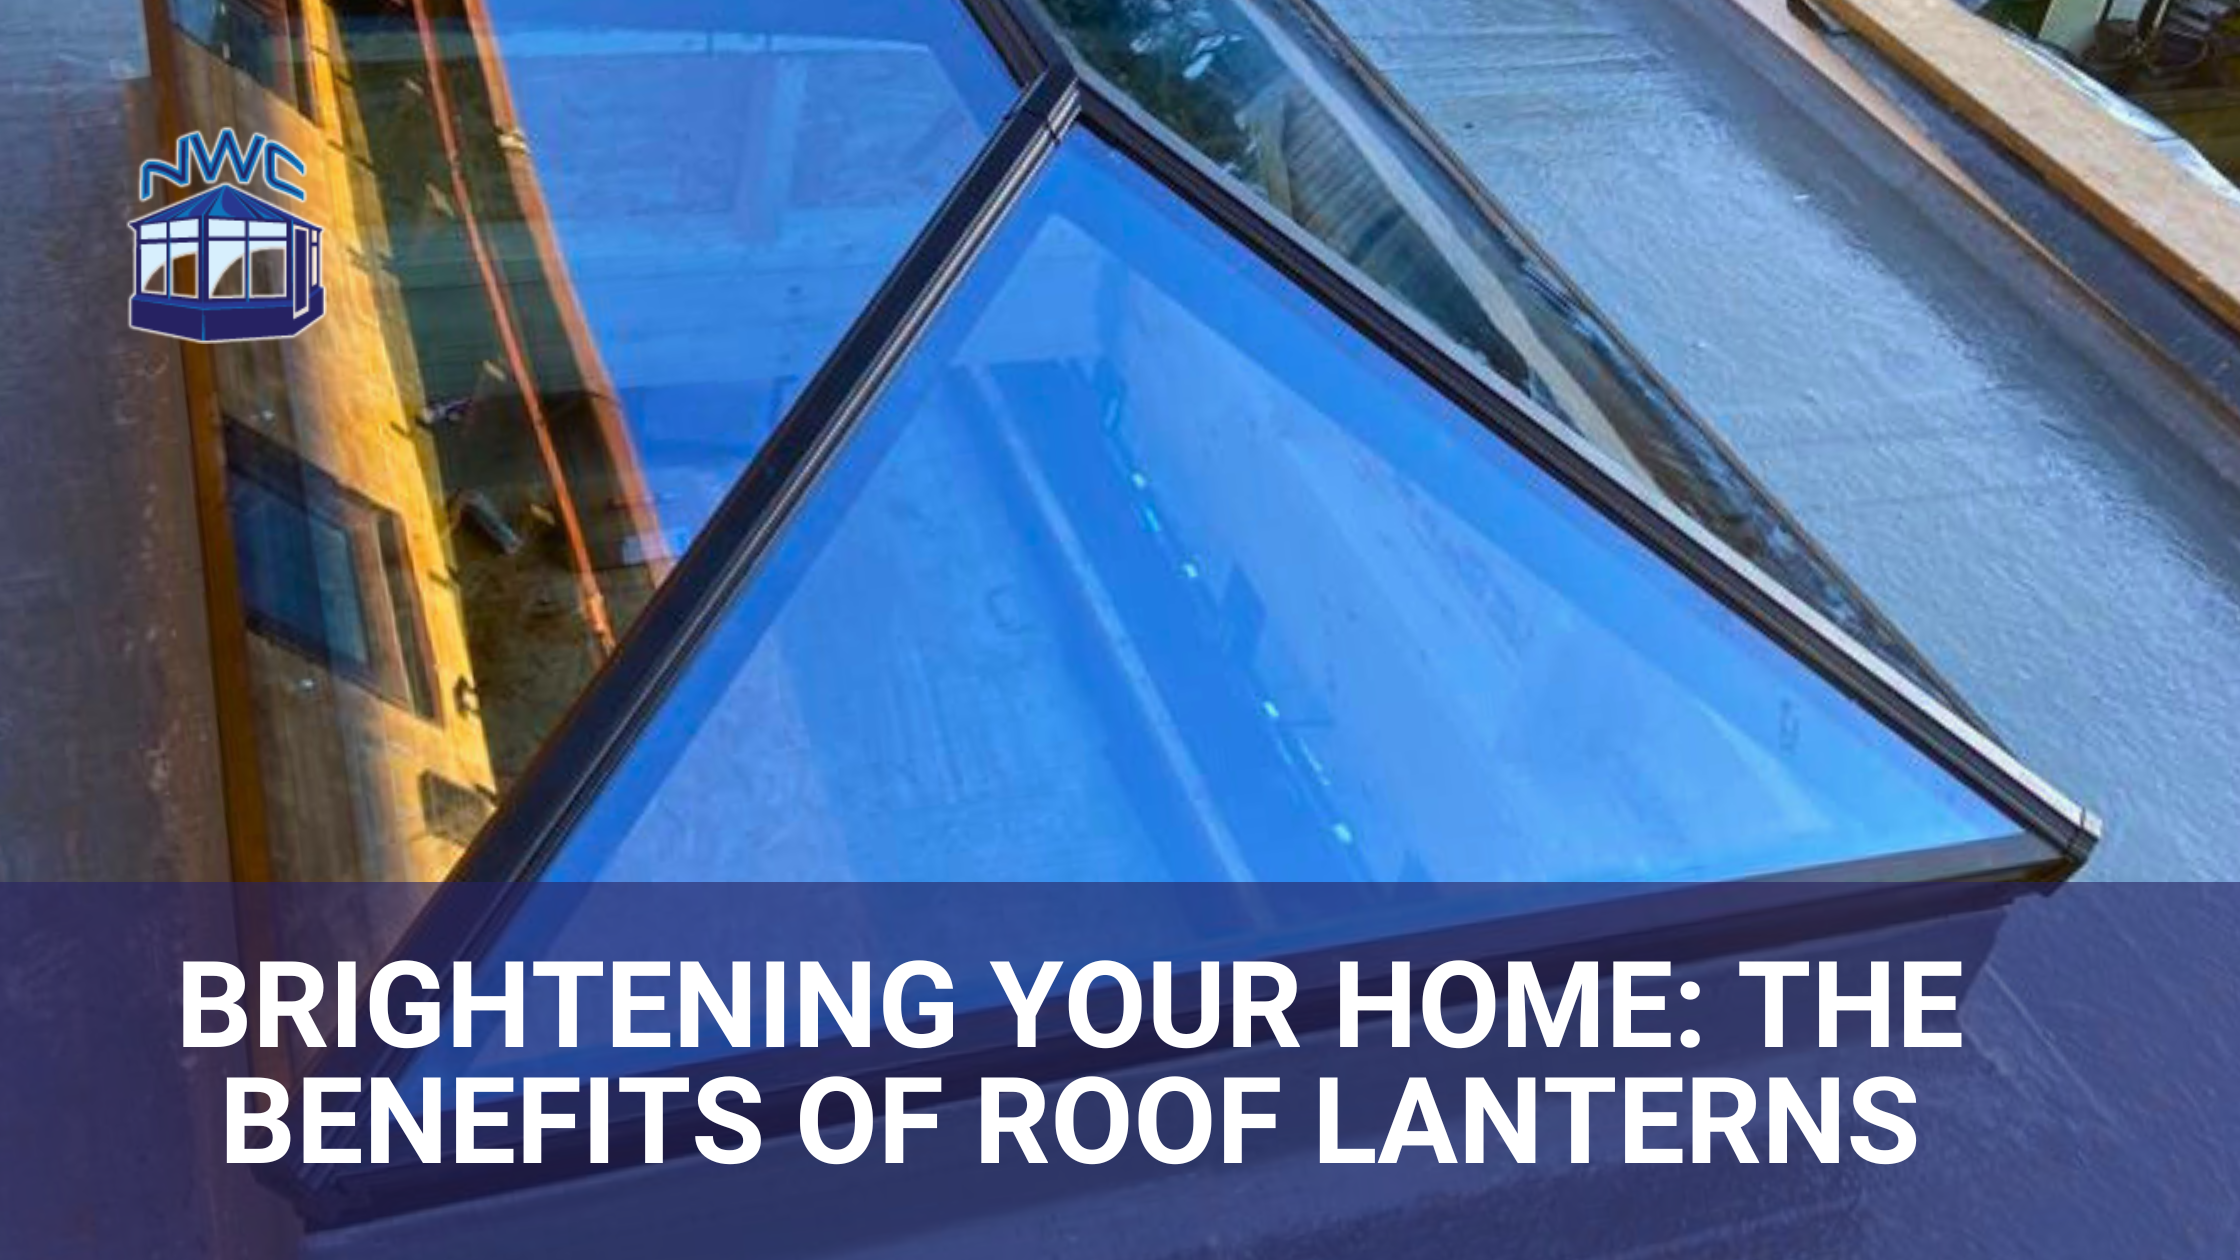 Brightening your home: The benefits of roof lanterns